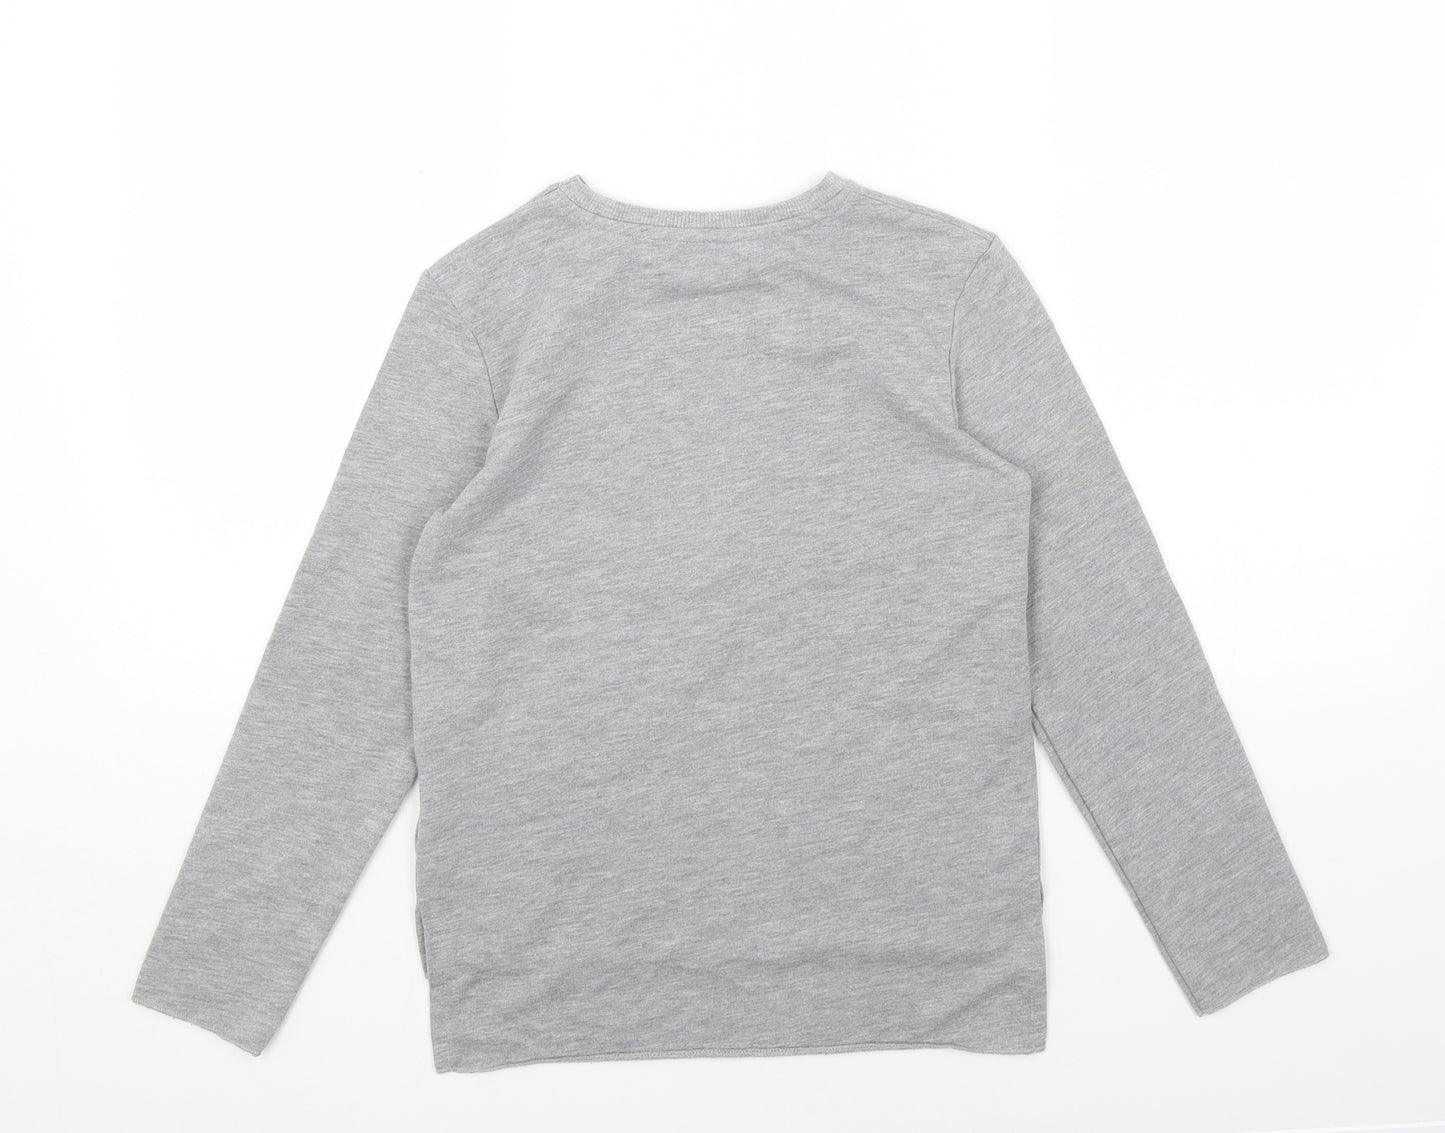 Young Dimension Girls Grey Polyester Pullover Sweatshirt Size 9-10 Years Pullover - Your are Awesome